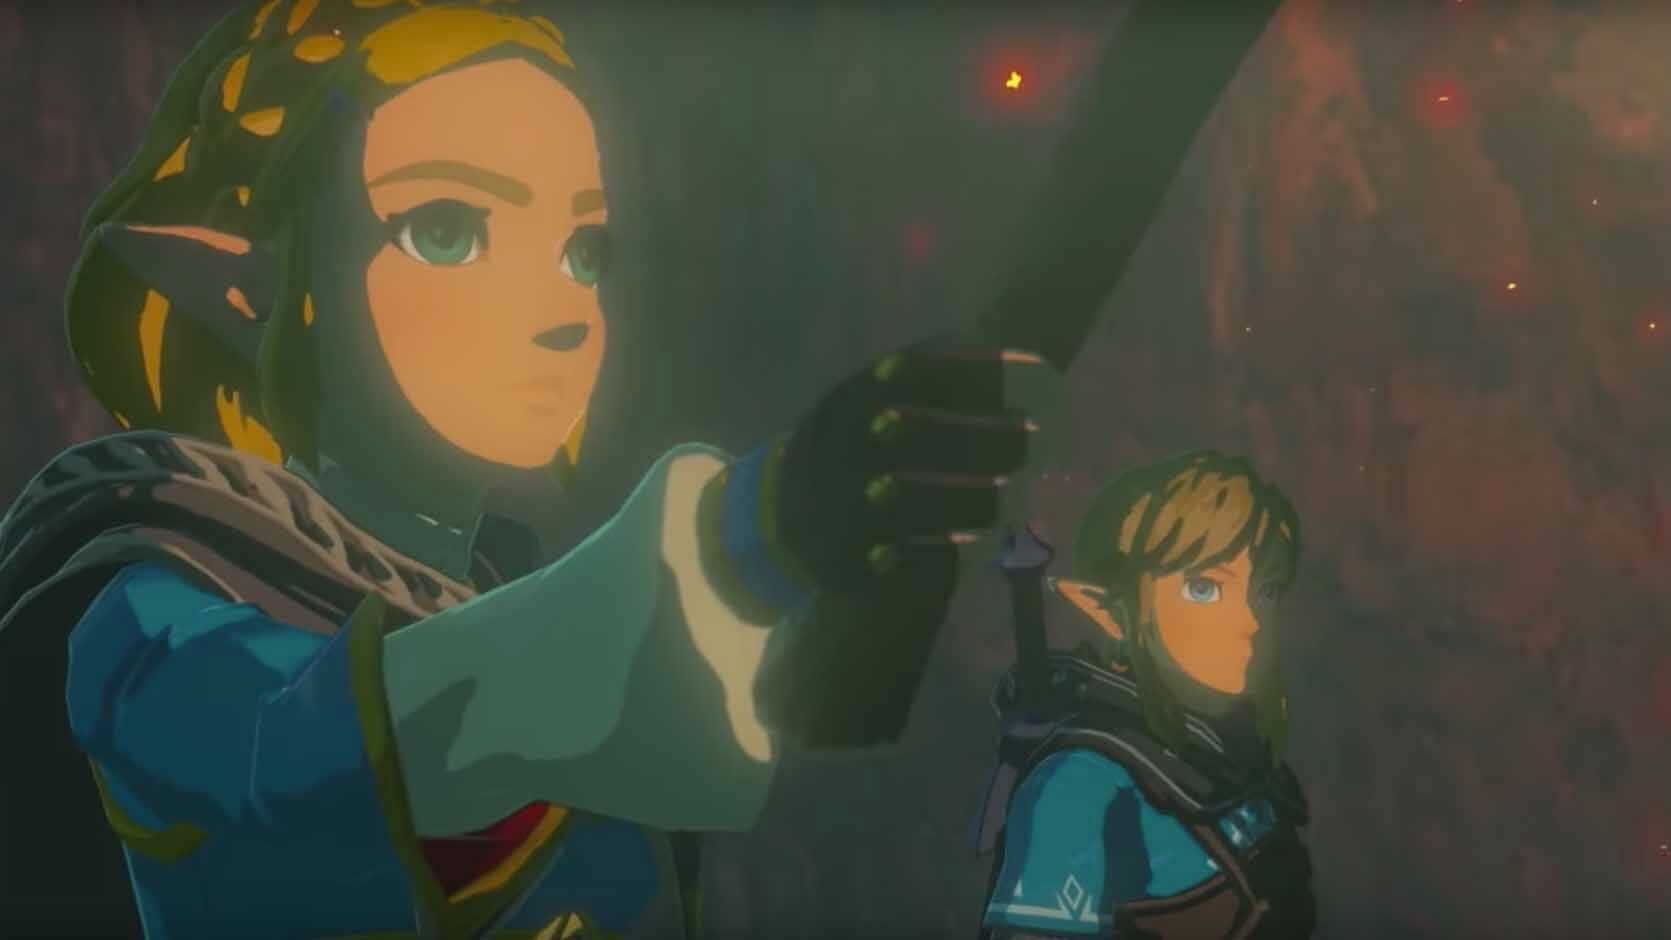 Breath of the Wild unveiled sequel – UPDATE: After all, not so new